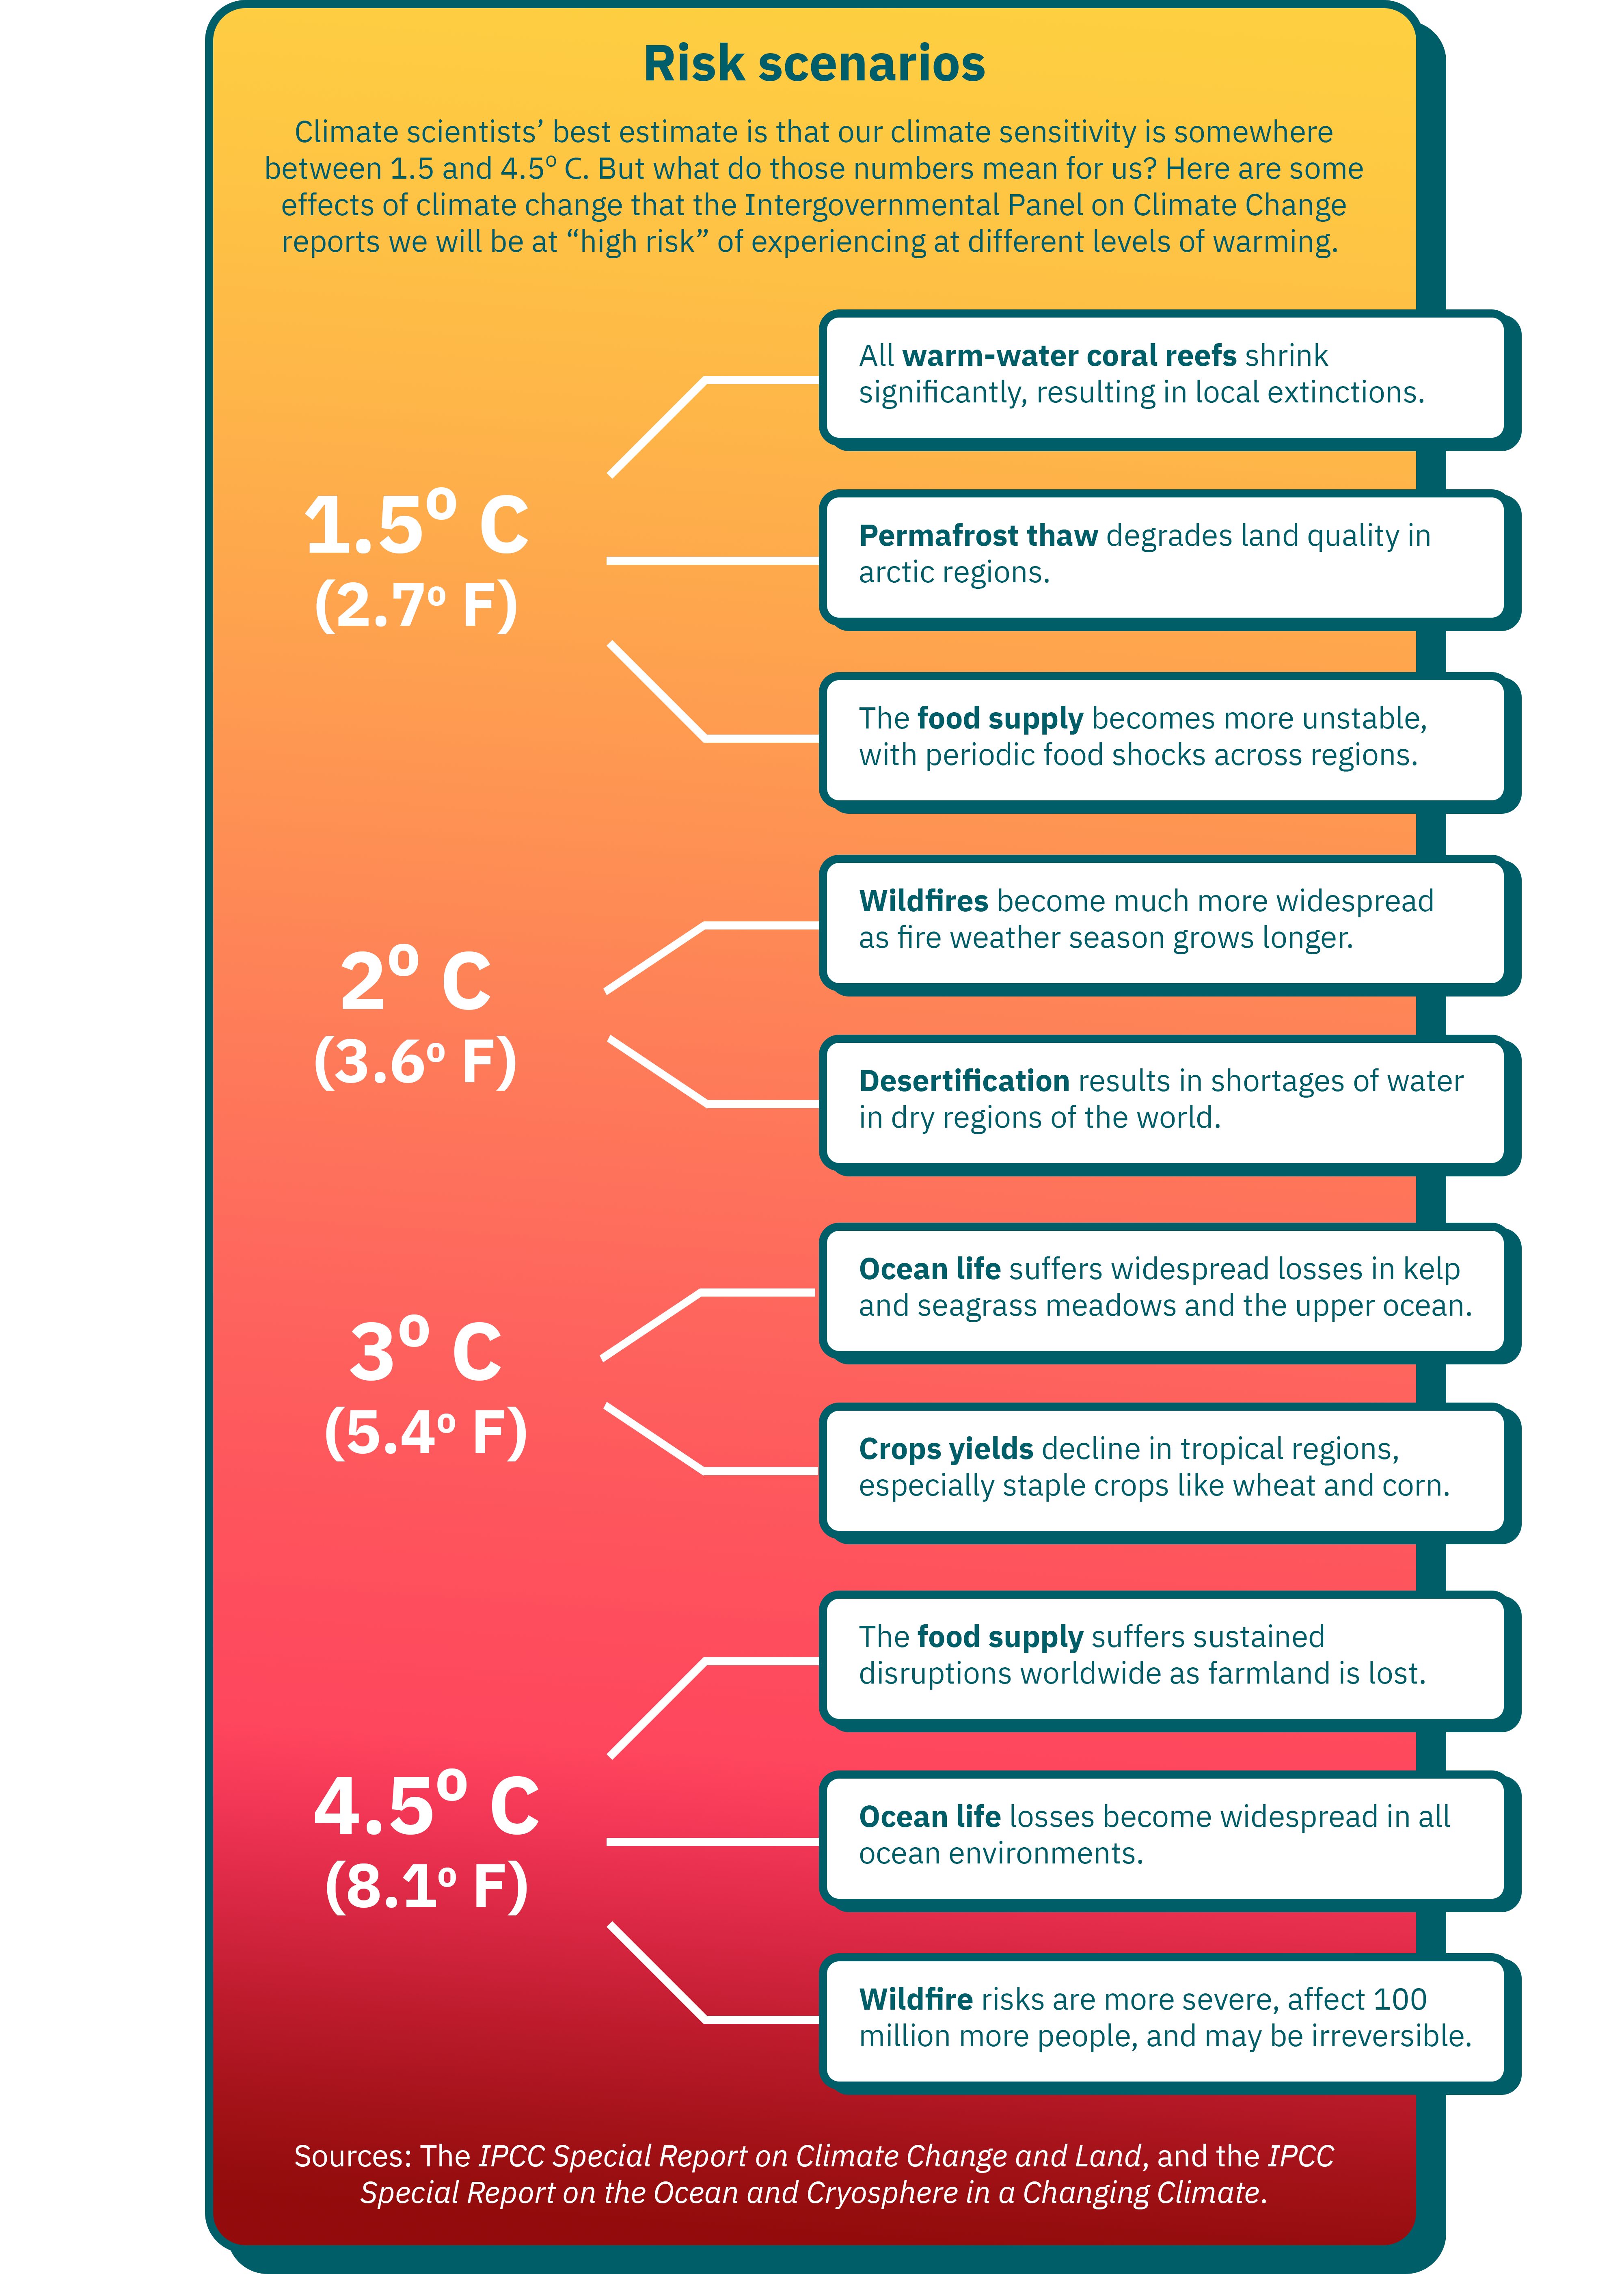 Infographic: Risk scenarios. Climate scientists’ best estimate is that our climate sensitivity is somewhere between 1.5 and 4.5o C. But what do those numbers mean for us? Here are some effects of climate change that the Intergovernmental Panel on Climate Change reports we will be at “high risk” of experiencing at different levels of warming. Sources: The IPCC Special Report on Climate Change and Land, and the IPCC Special Report on the Ocean and Cryosphere in a Changing Climate.